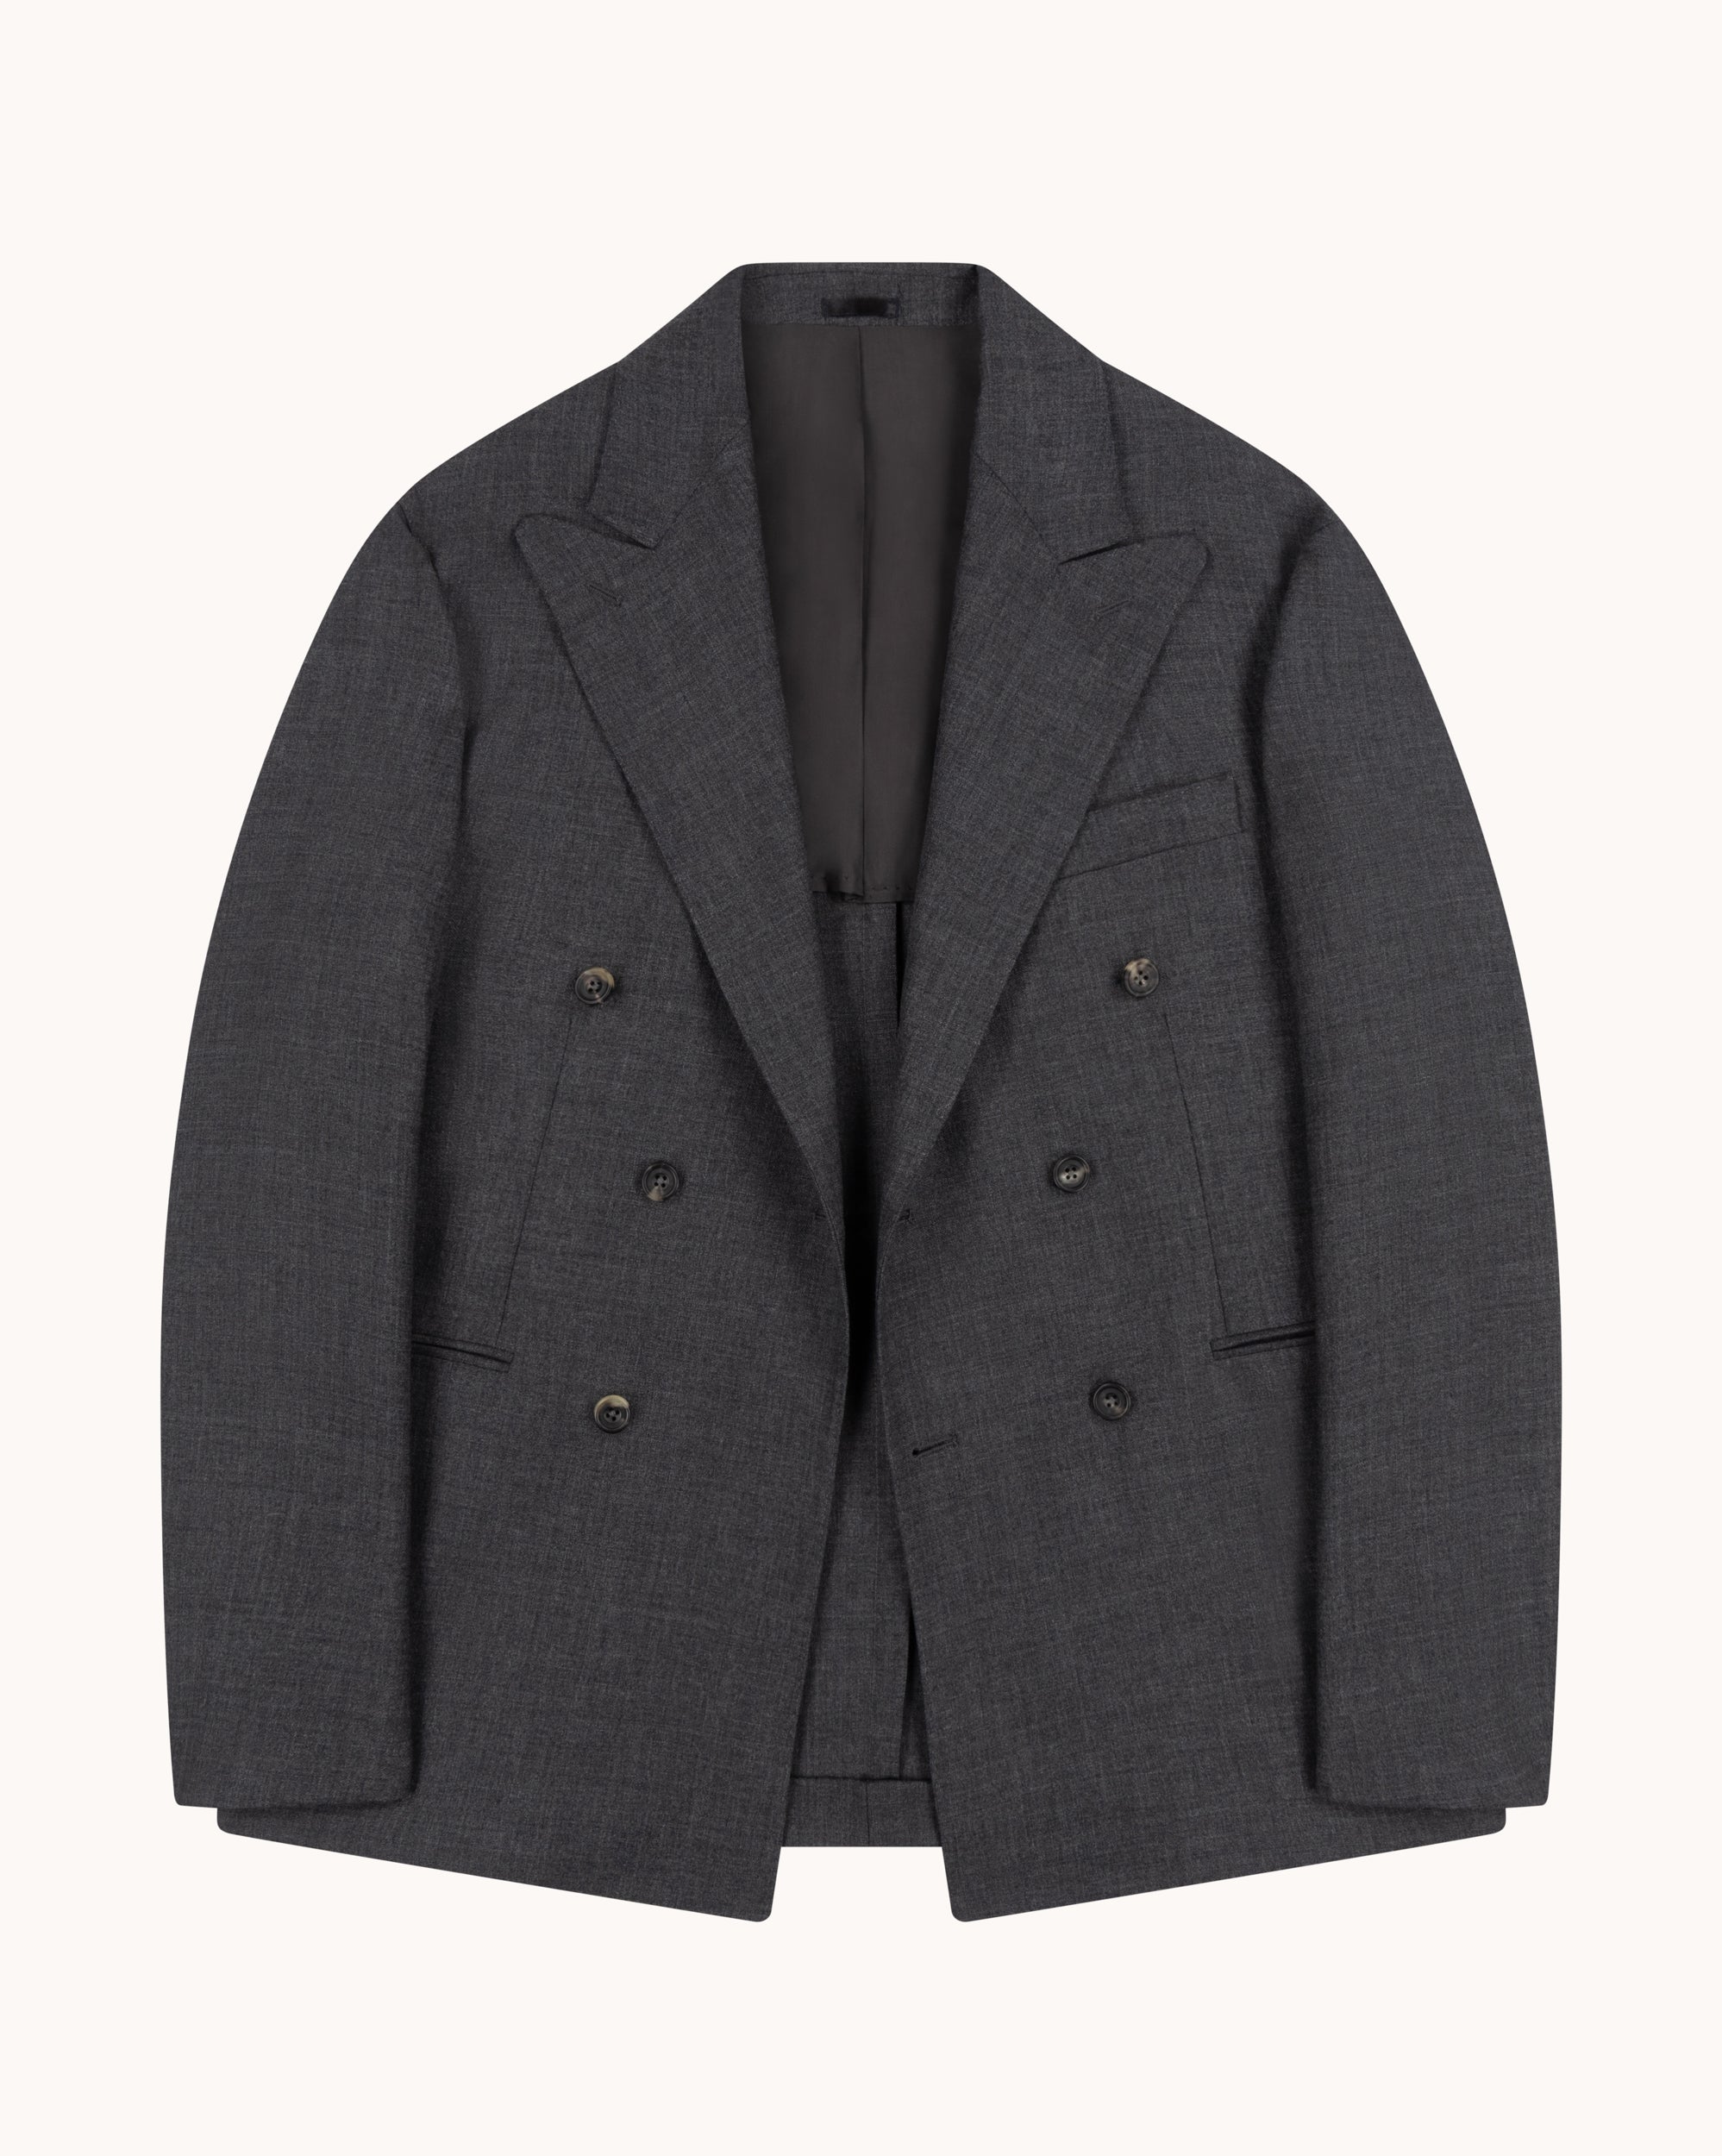 Double Breasted Sport Jacket - Charcoal Tropical Wool